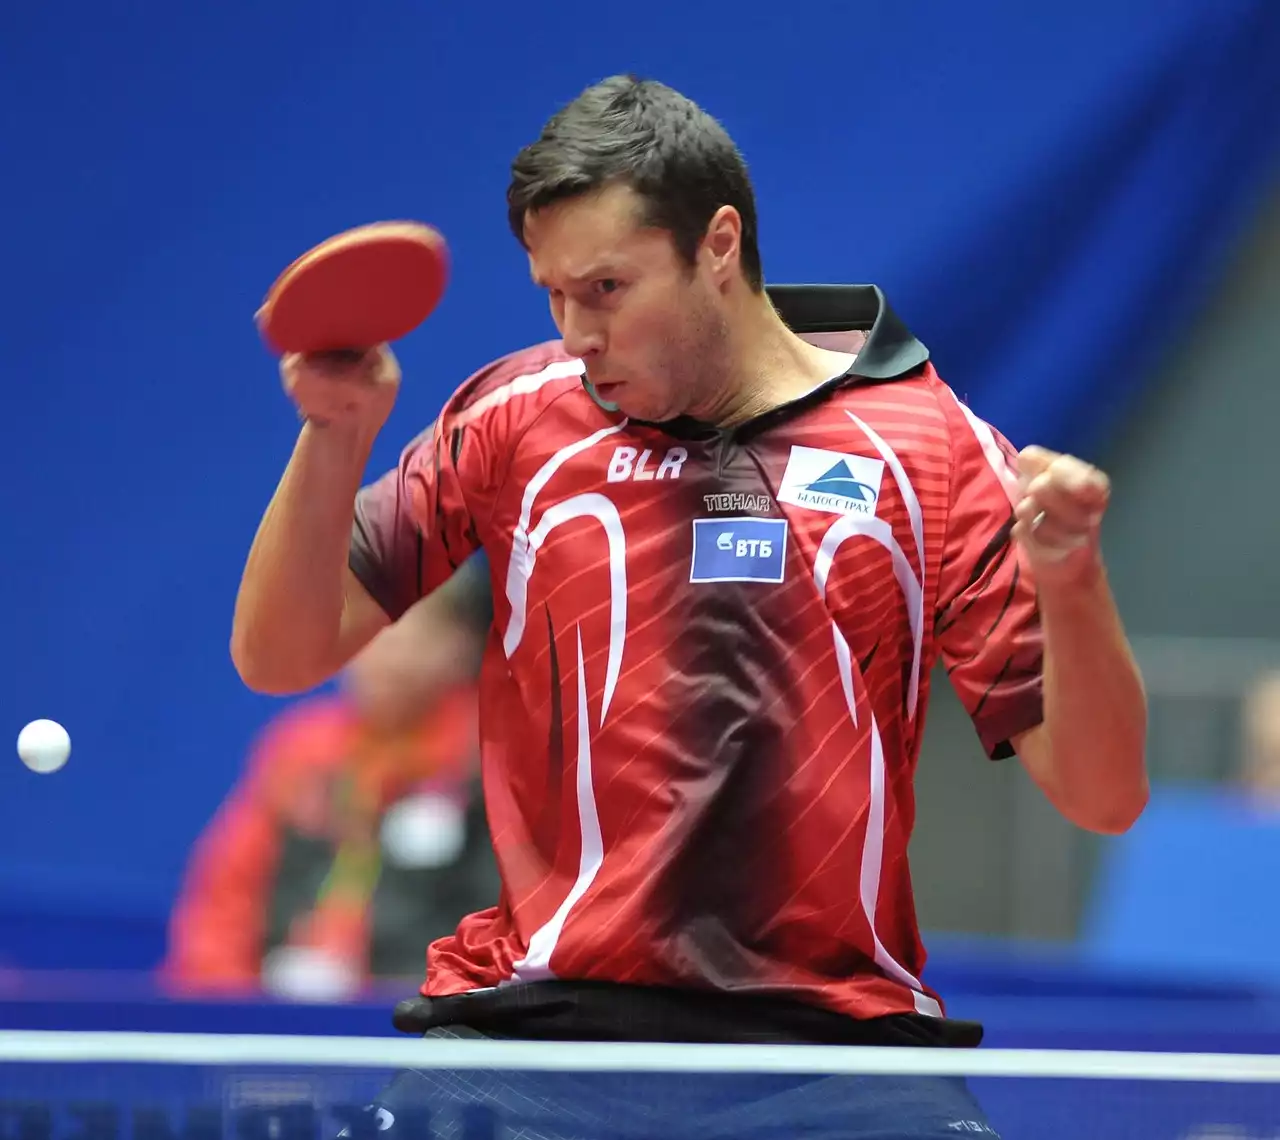 5 Amazing Matches from International Table Tennis Leagues